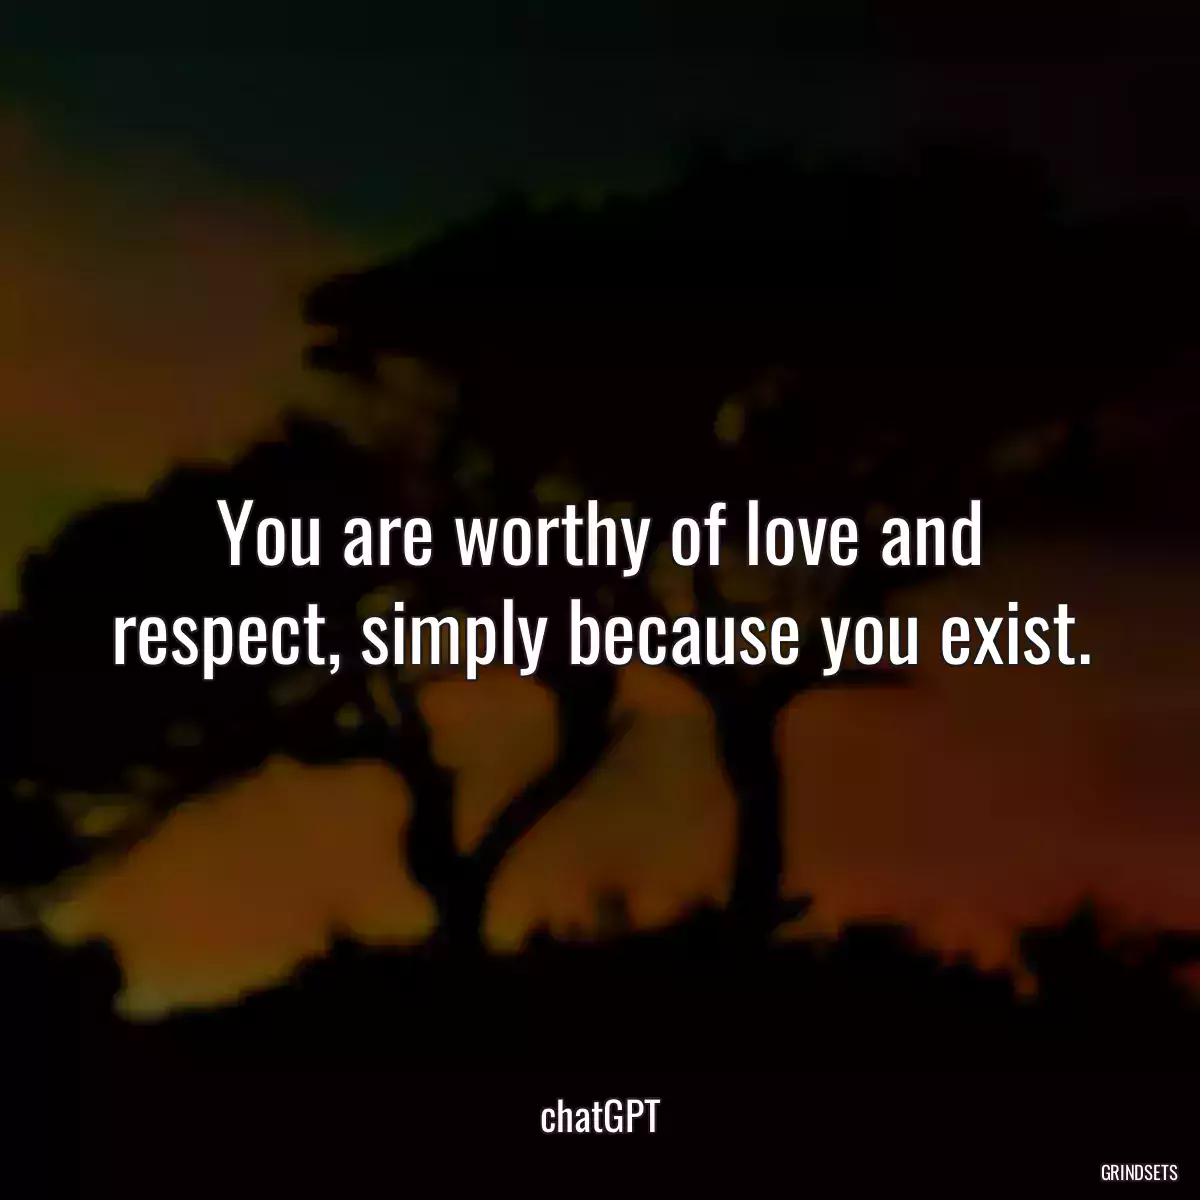 You are worthy of love and respect, simply because you exist.